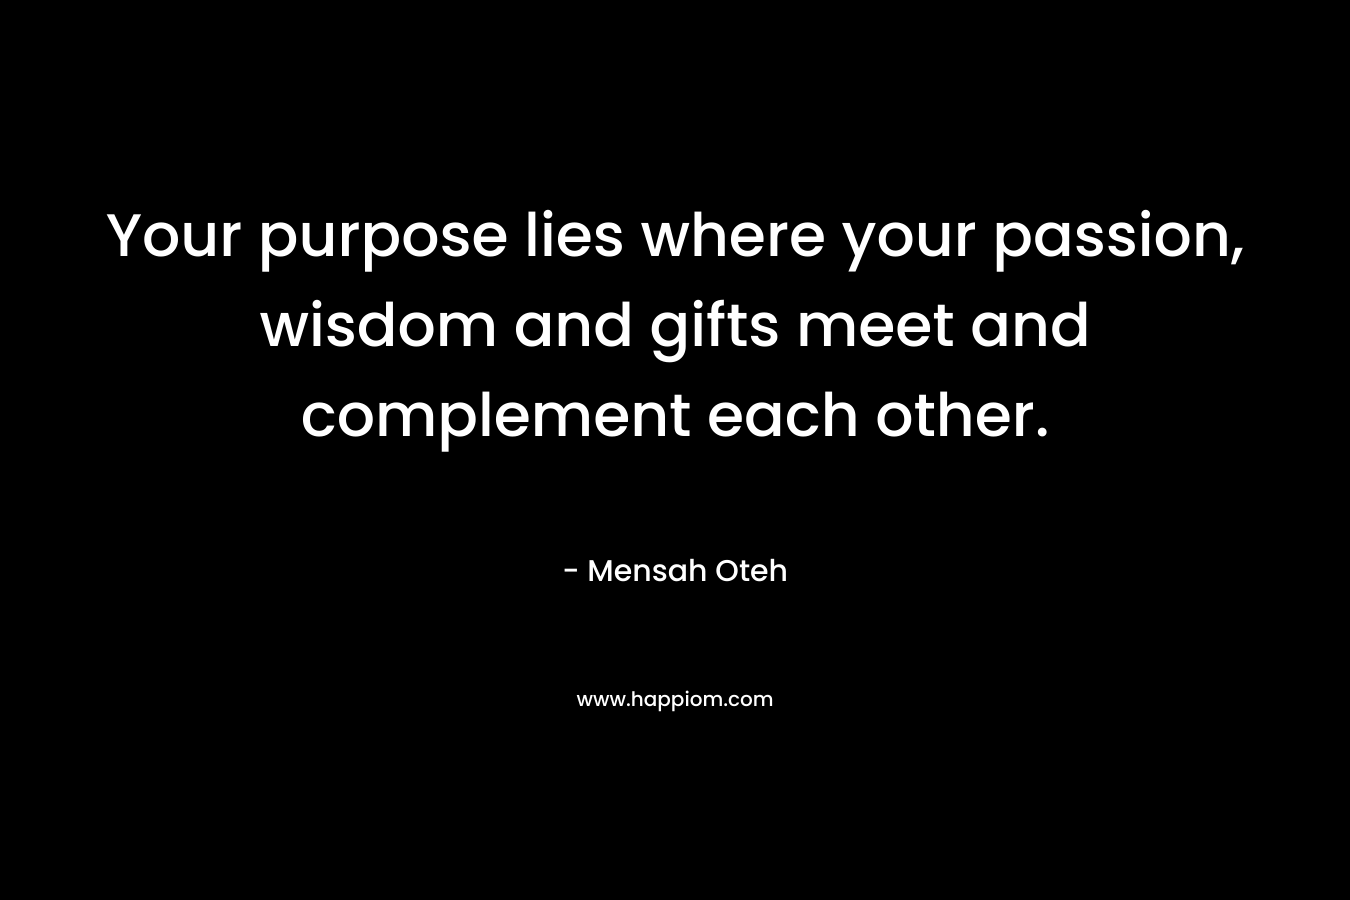 Your purpose lies where your passion, wisdom and gifts meet and complement each other.